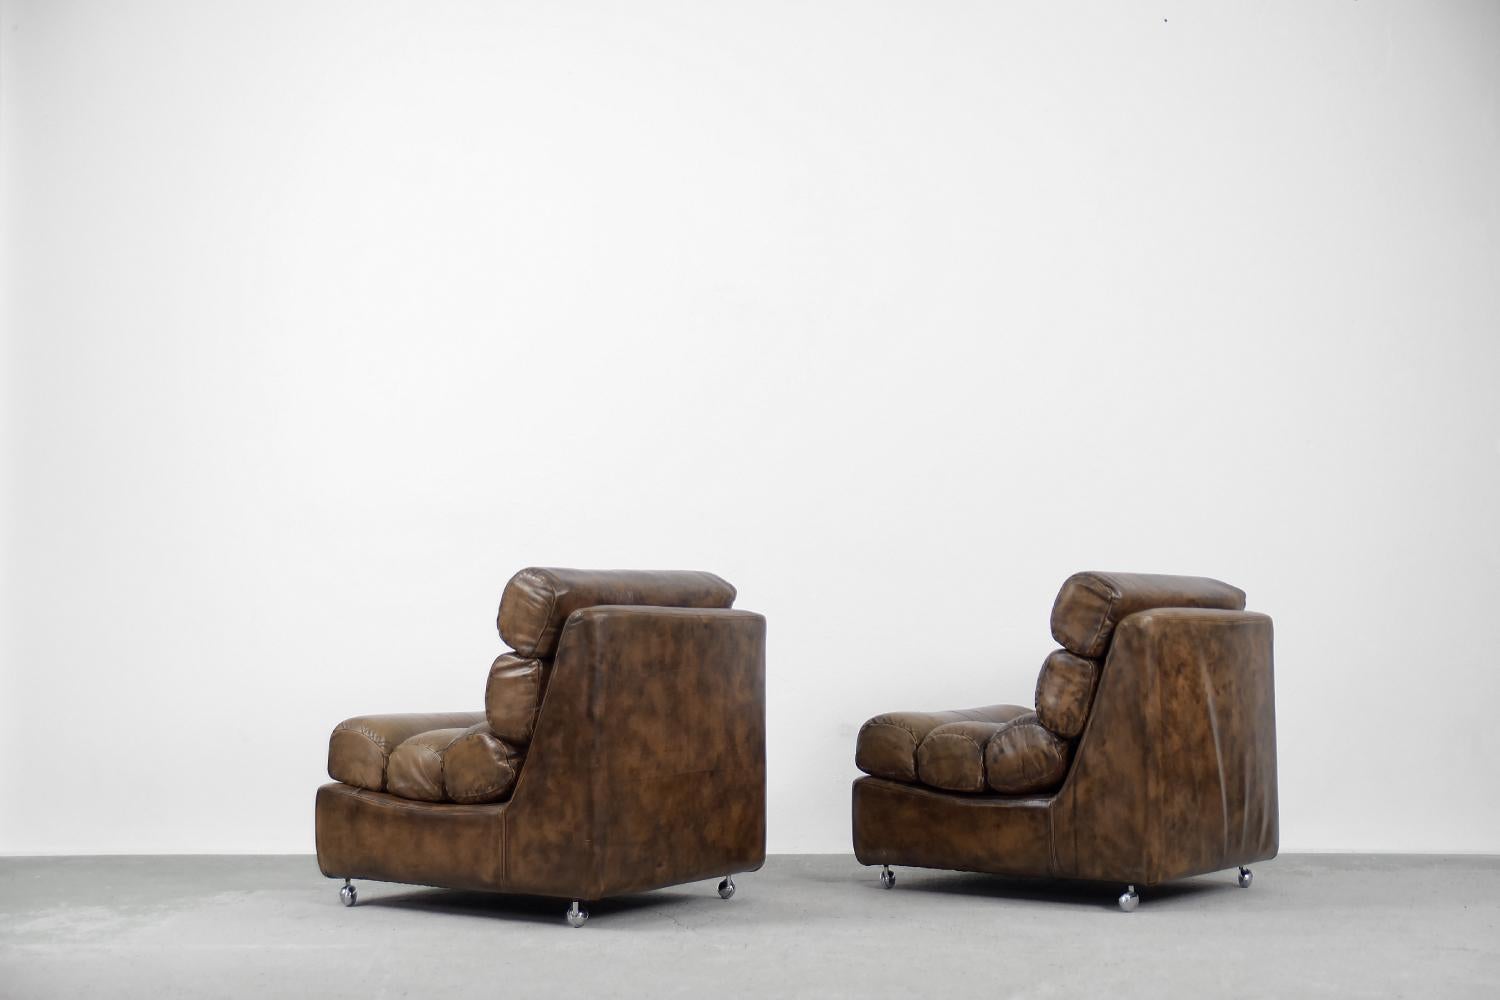 Pair of Rare Vintage Brutalist Dark Brown Leather Armchairs on Wheels, 1960s For Sale 4